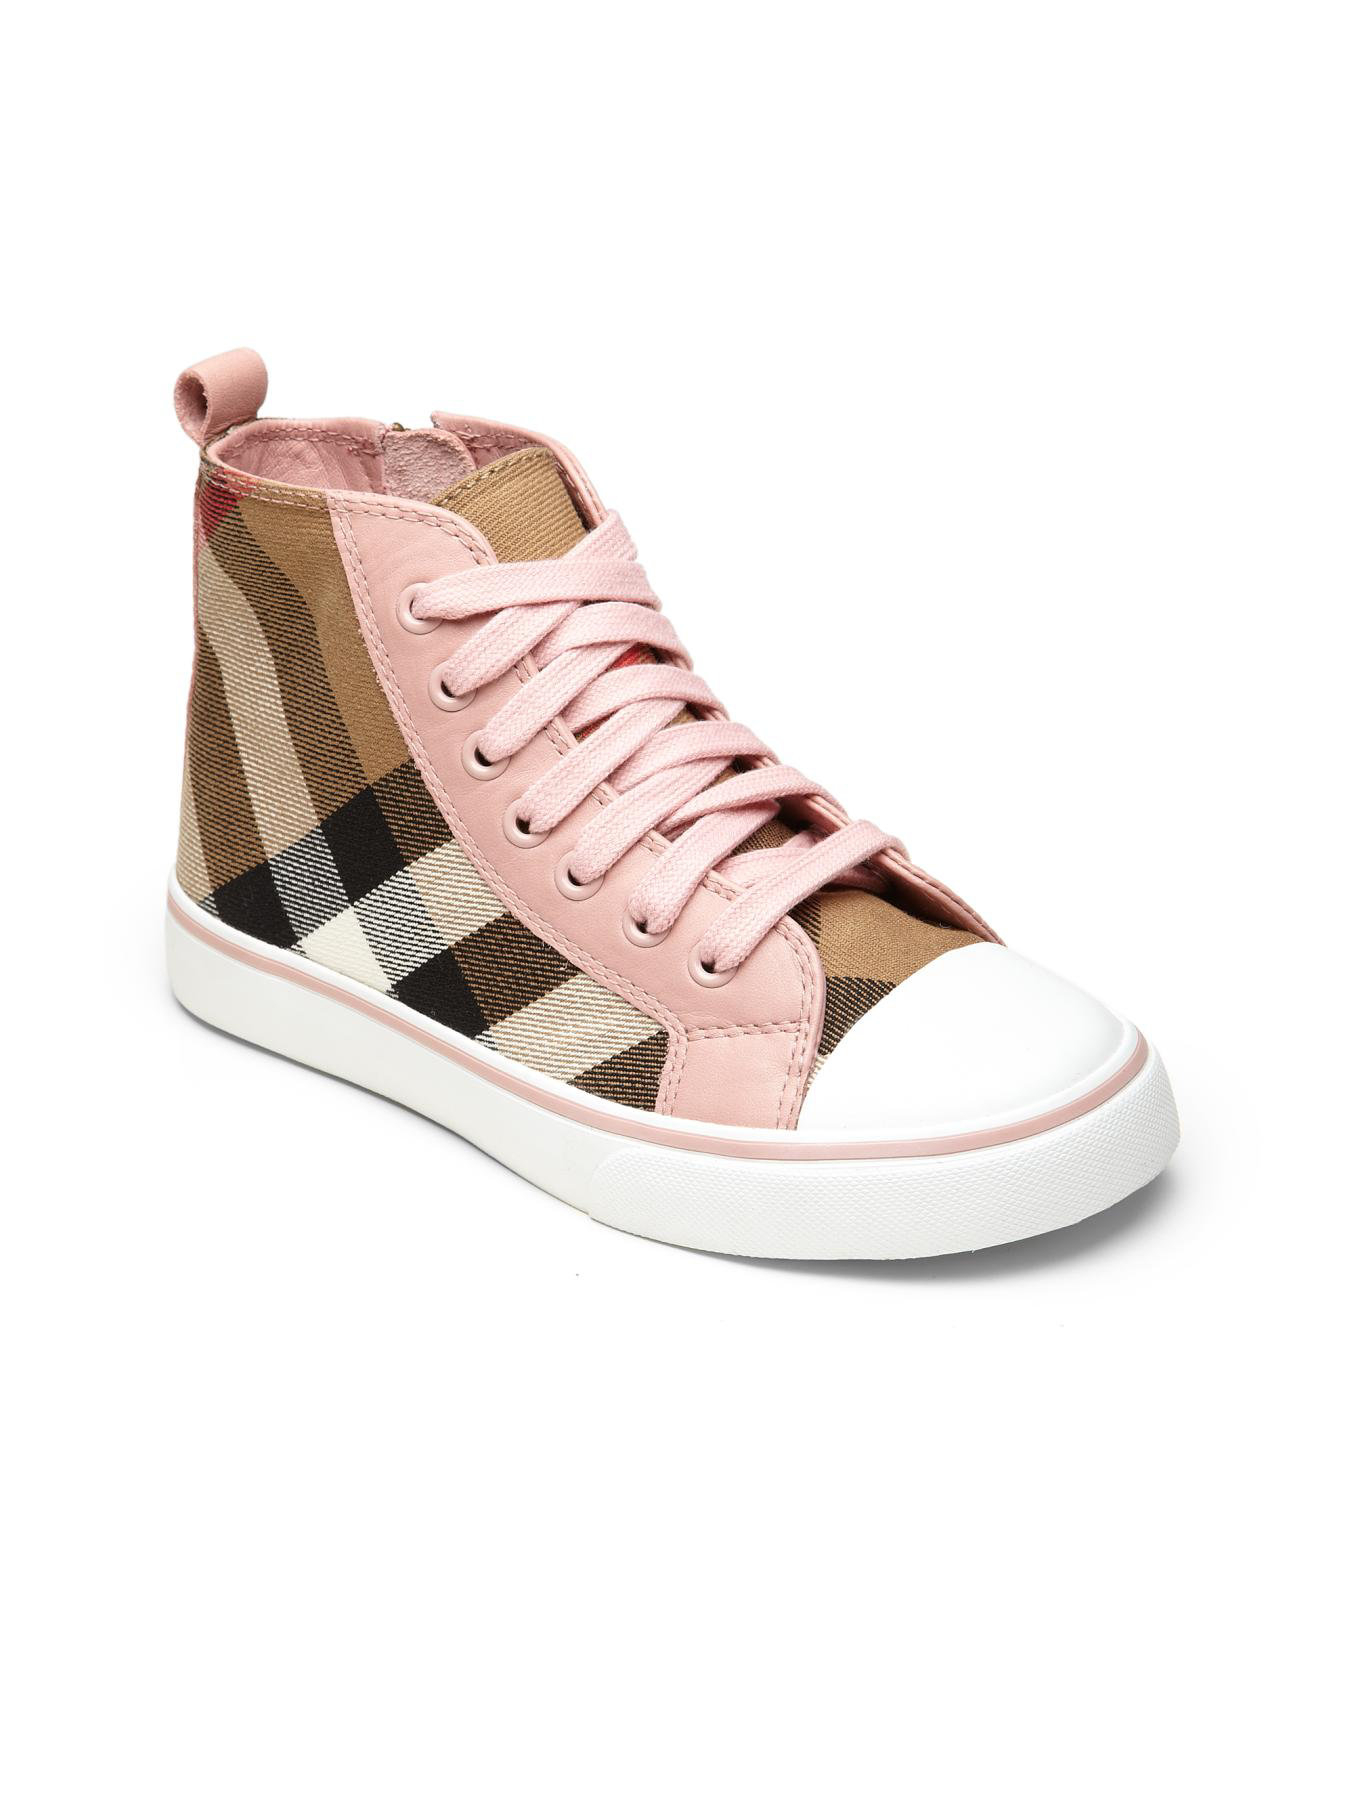 girls burberry shoes